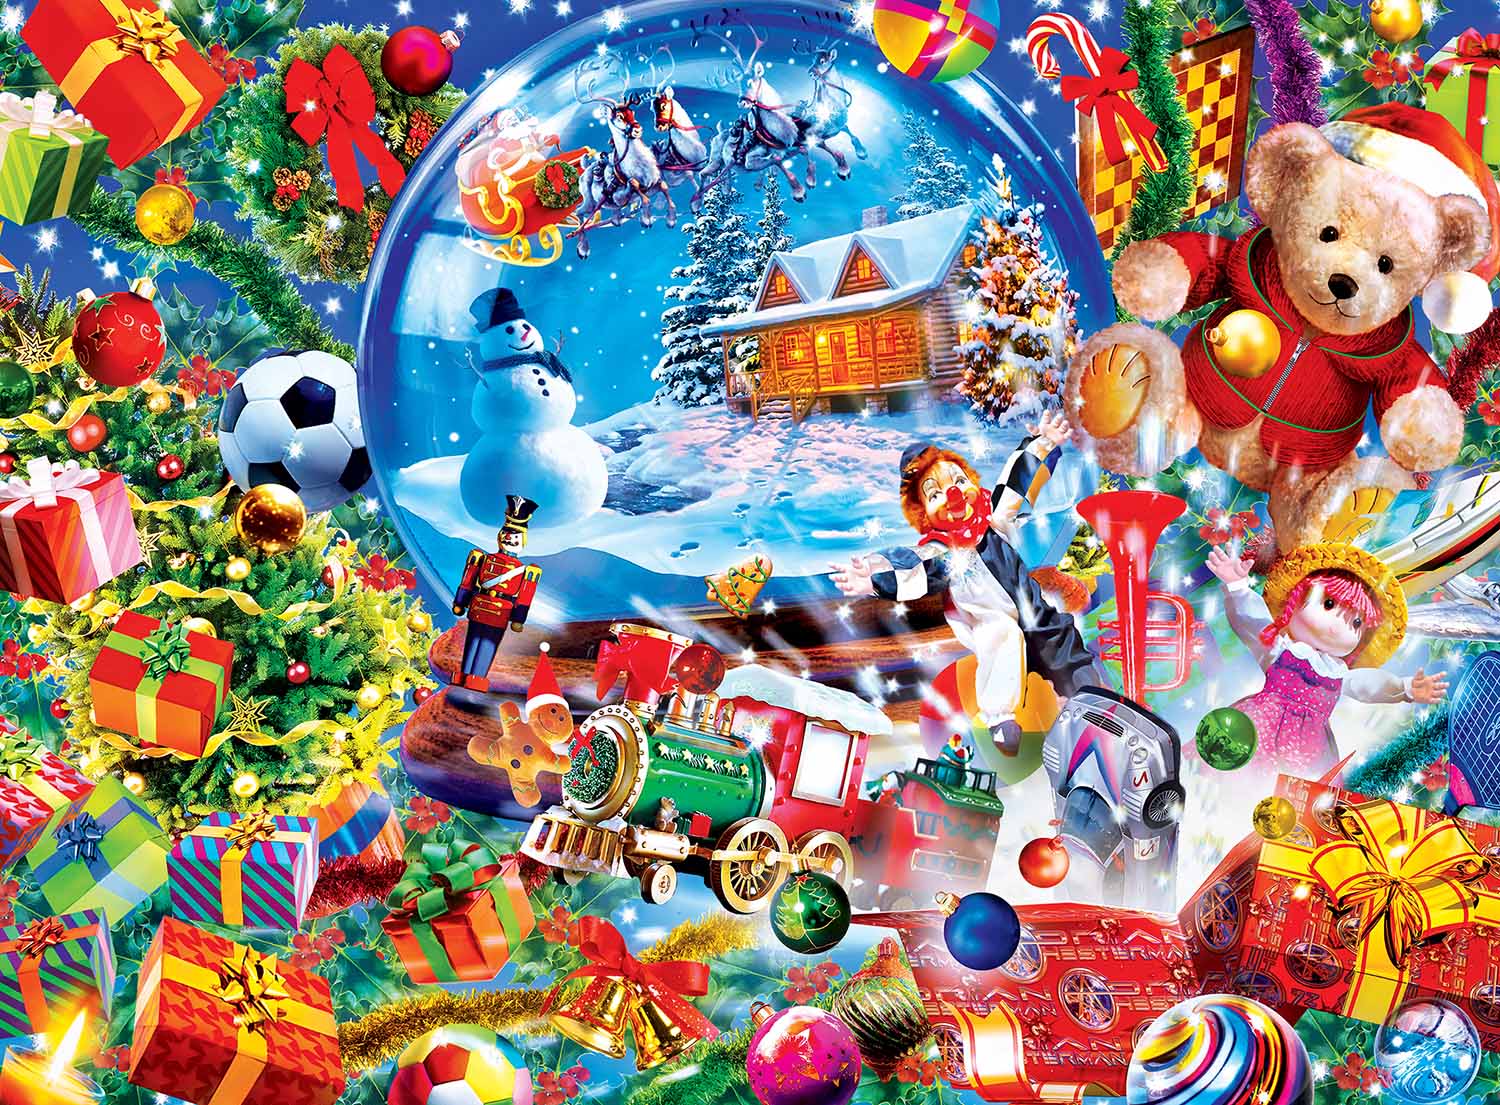 Holiday Dreams  Christmas Glitter / Shimmer / Foil Puzzles